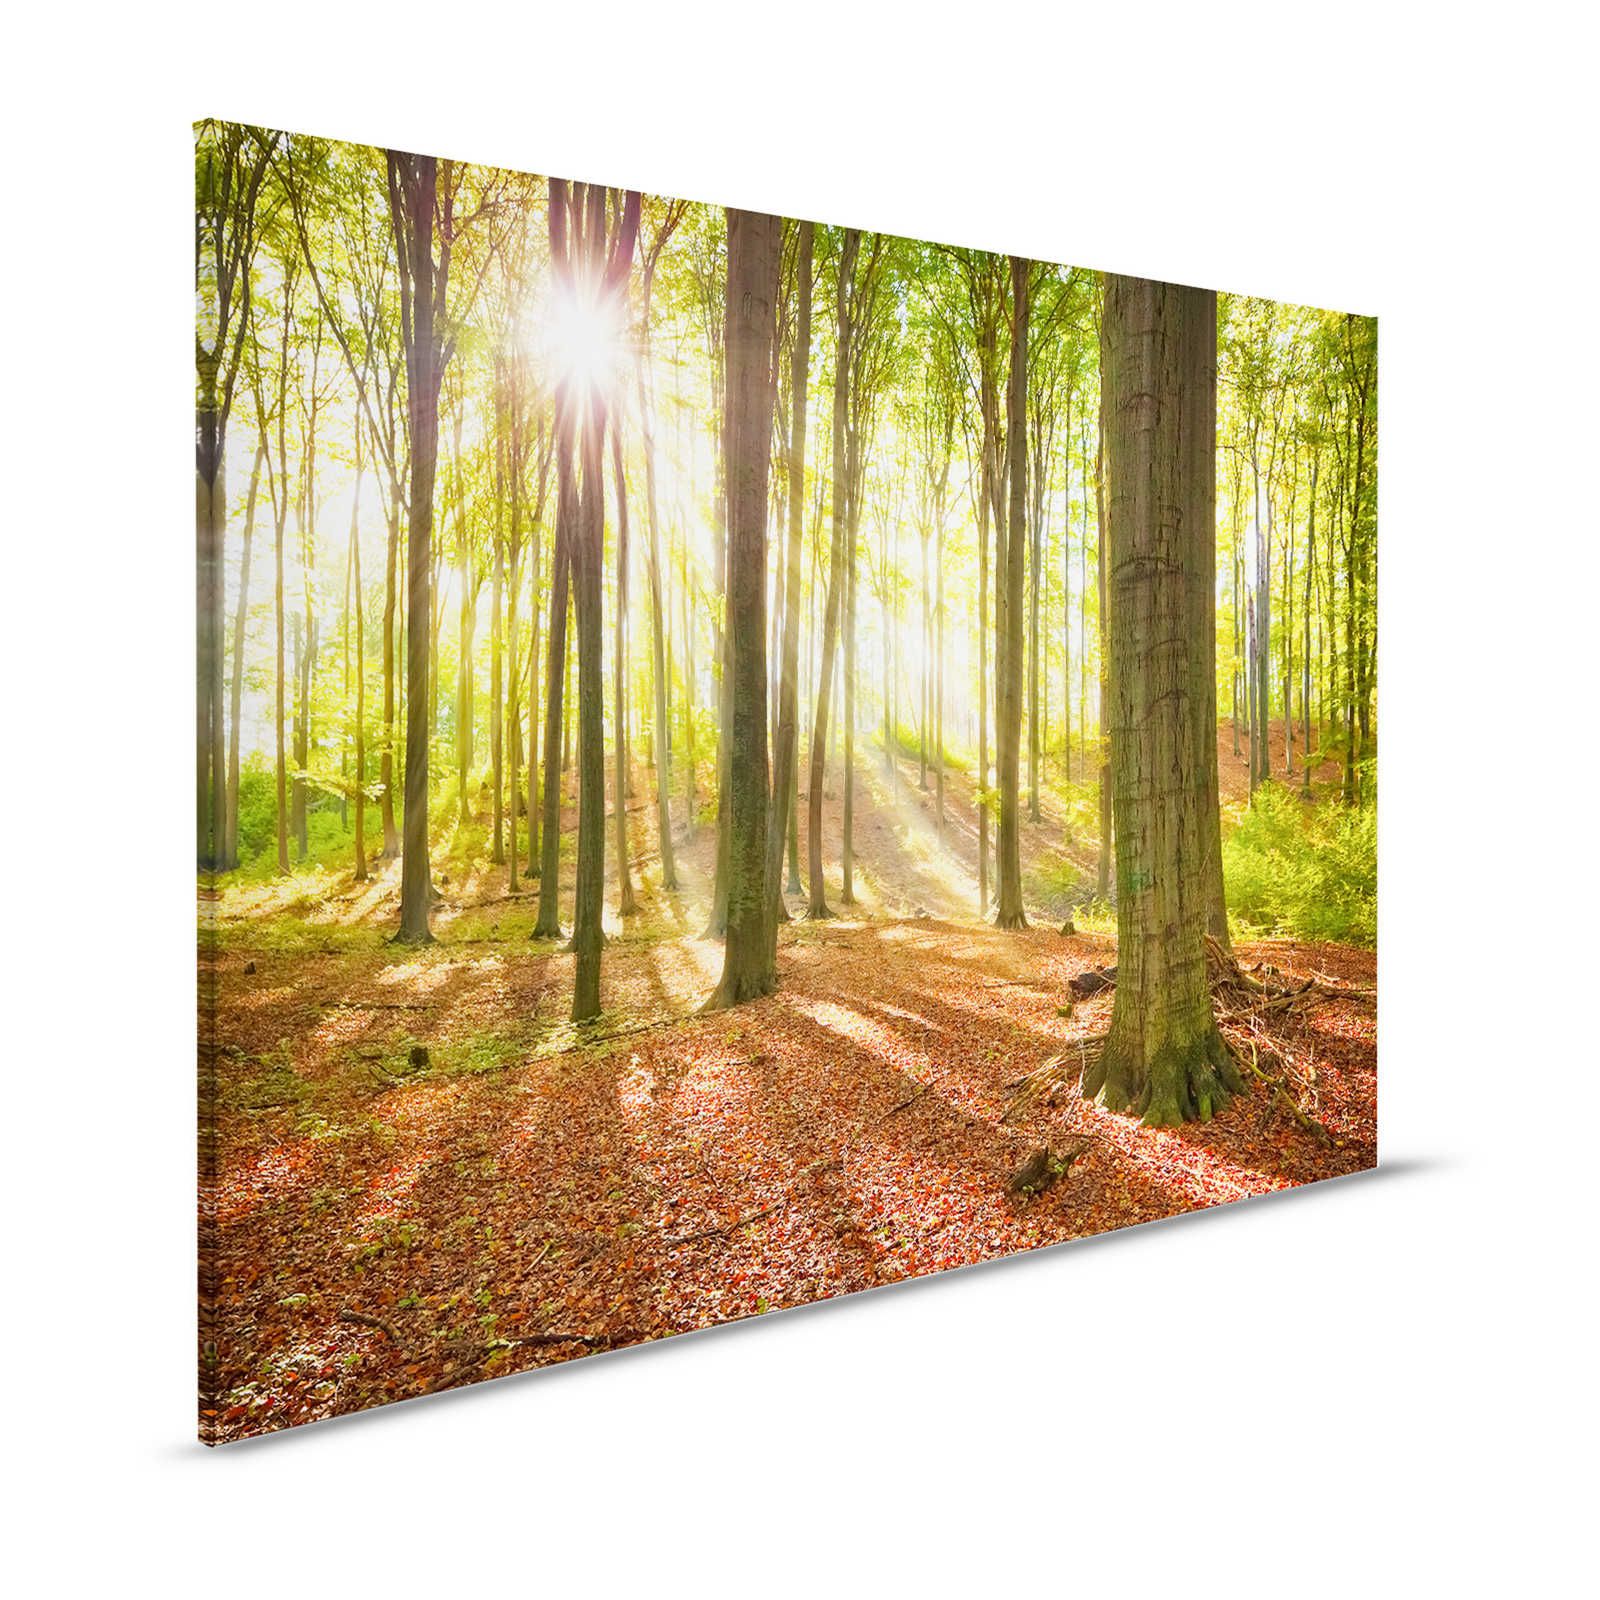 Canvas painting Nature Deciduous Forest with Light Rays - 1,20 m x 0,80 m
